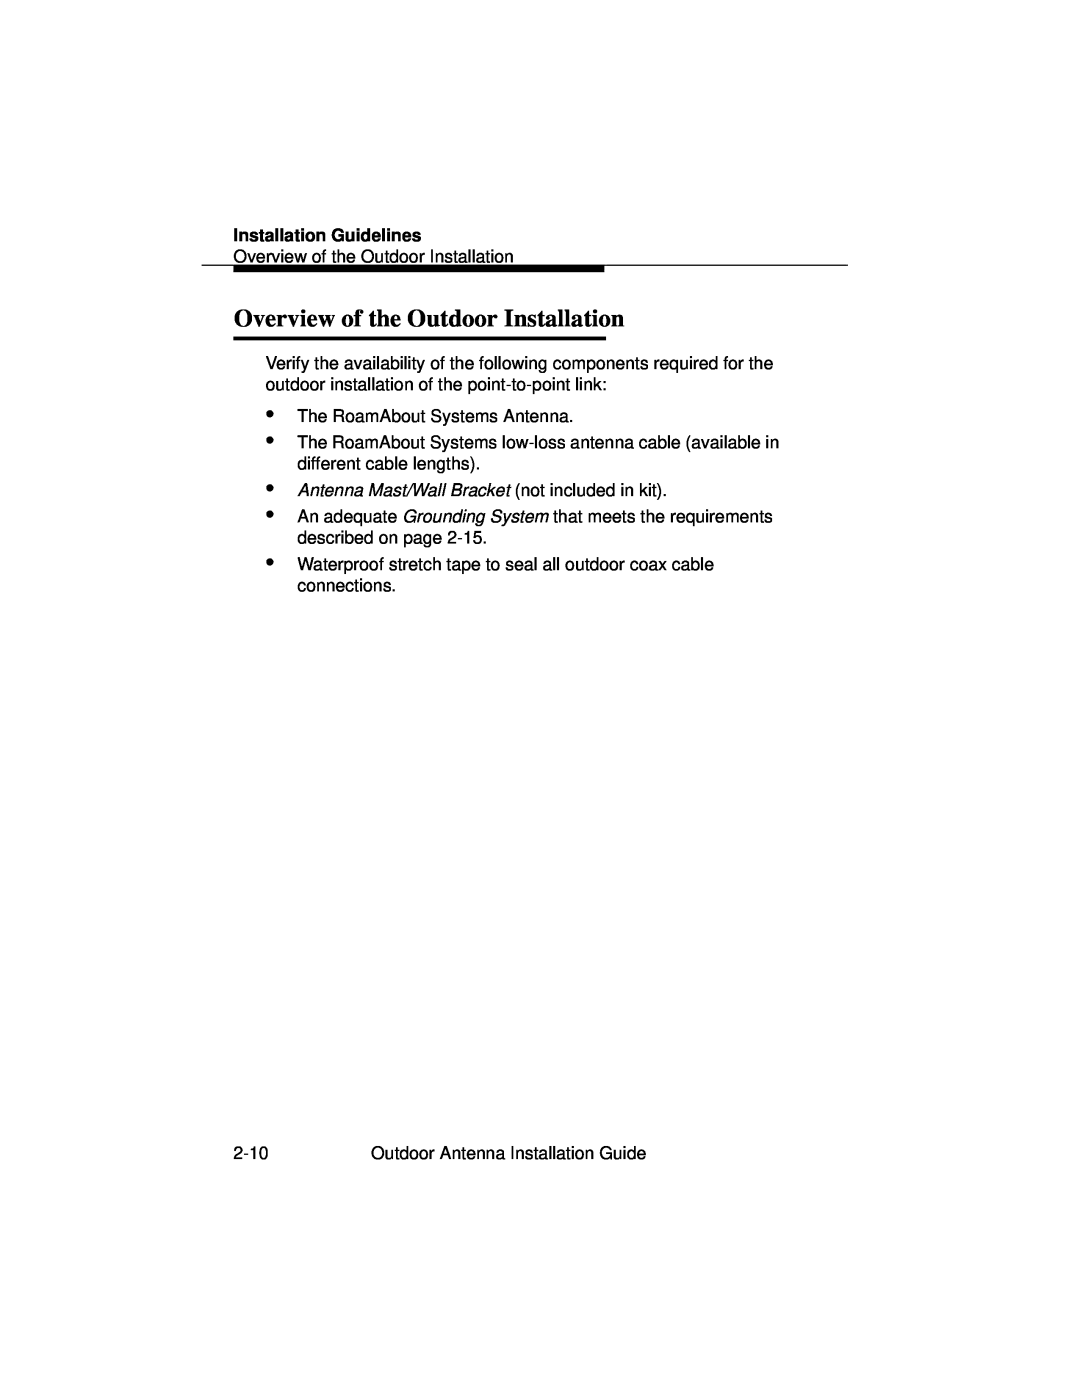 Cabletron Systems 9033073 manual Overview of the Outdoor Installation, Installation Guidelines 